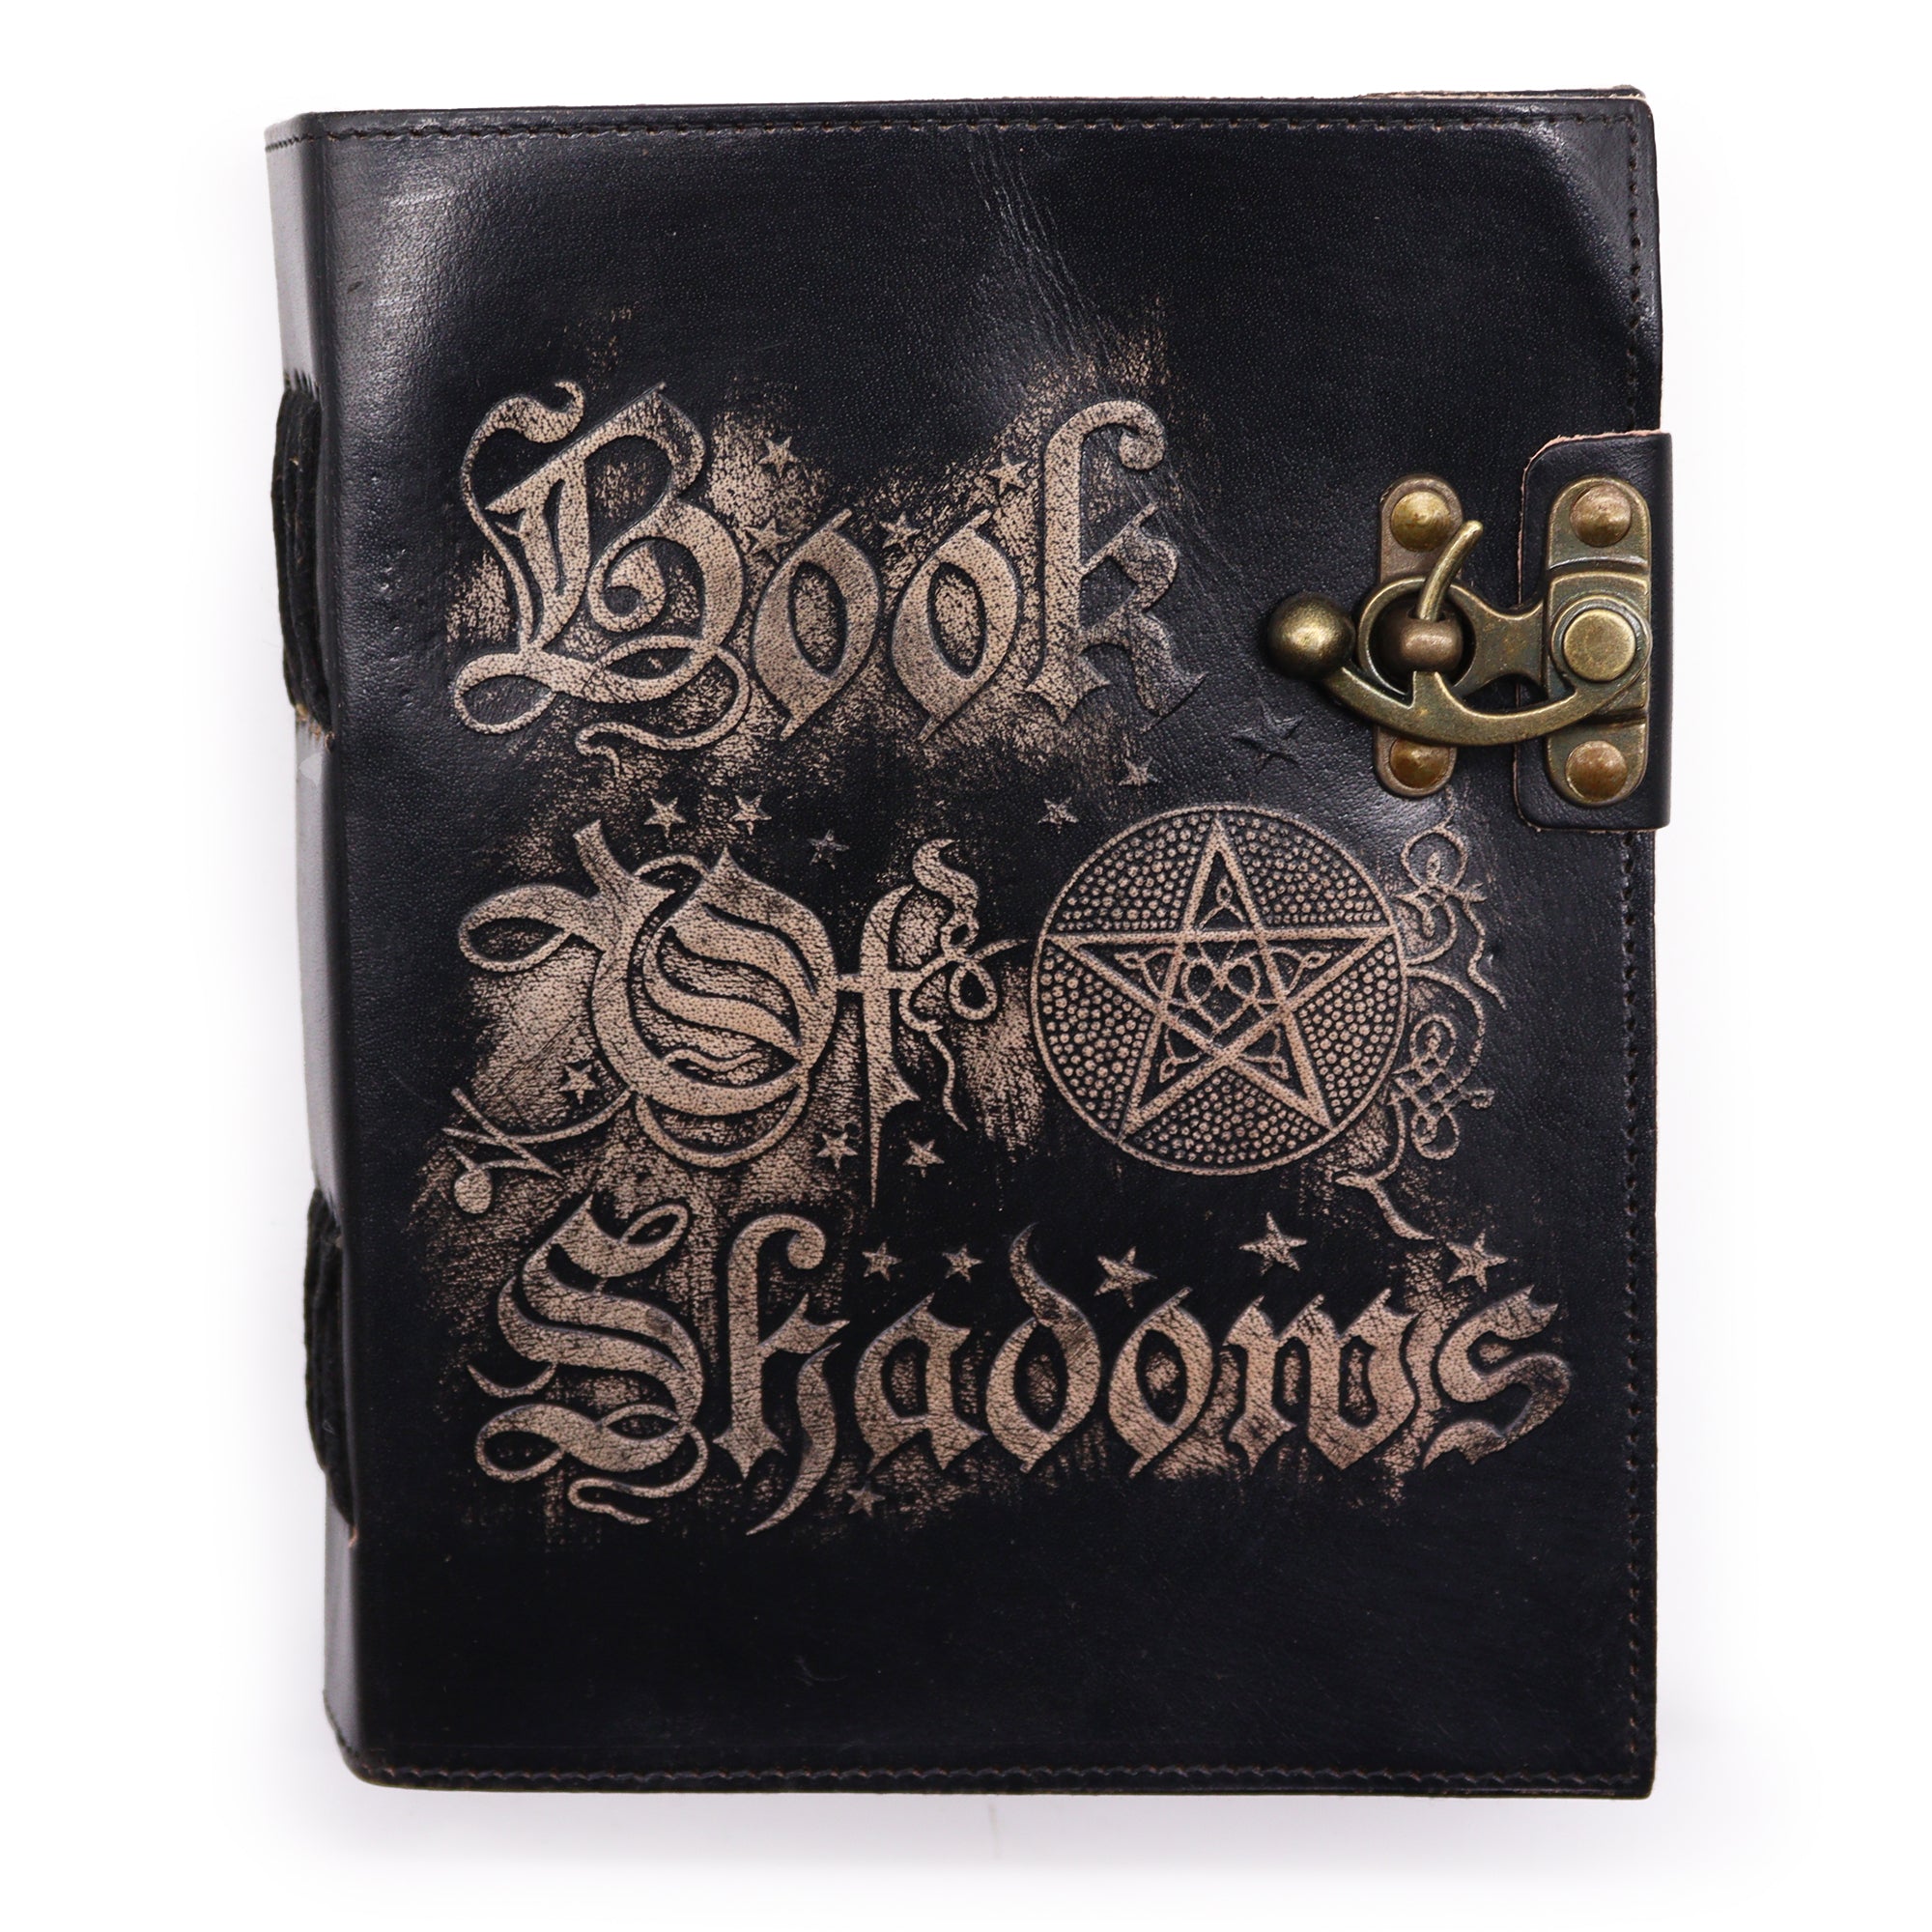 View Book of Shadows 200 pages decleedged 15x21cm information